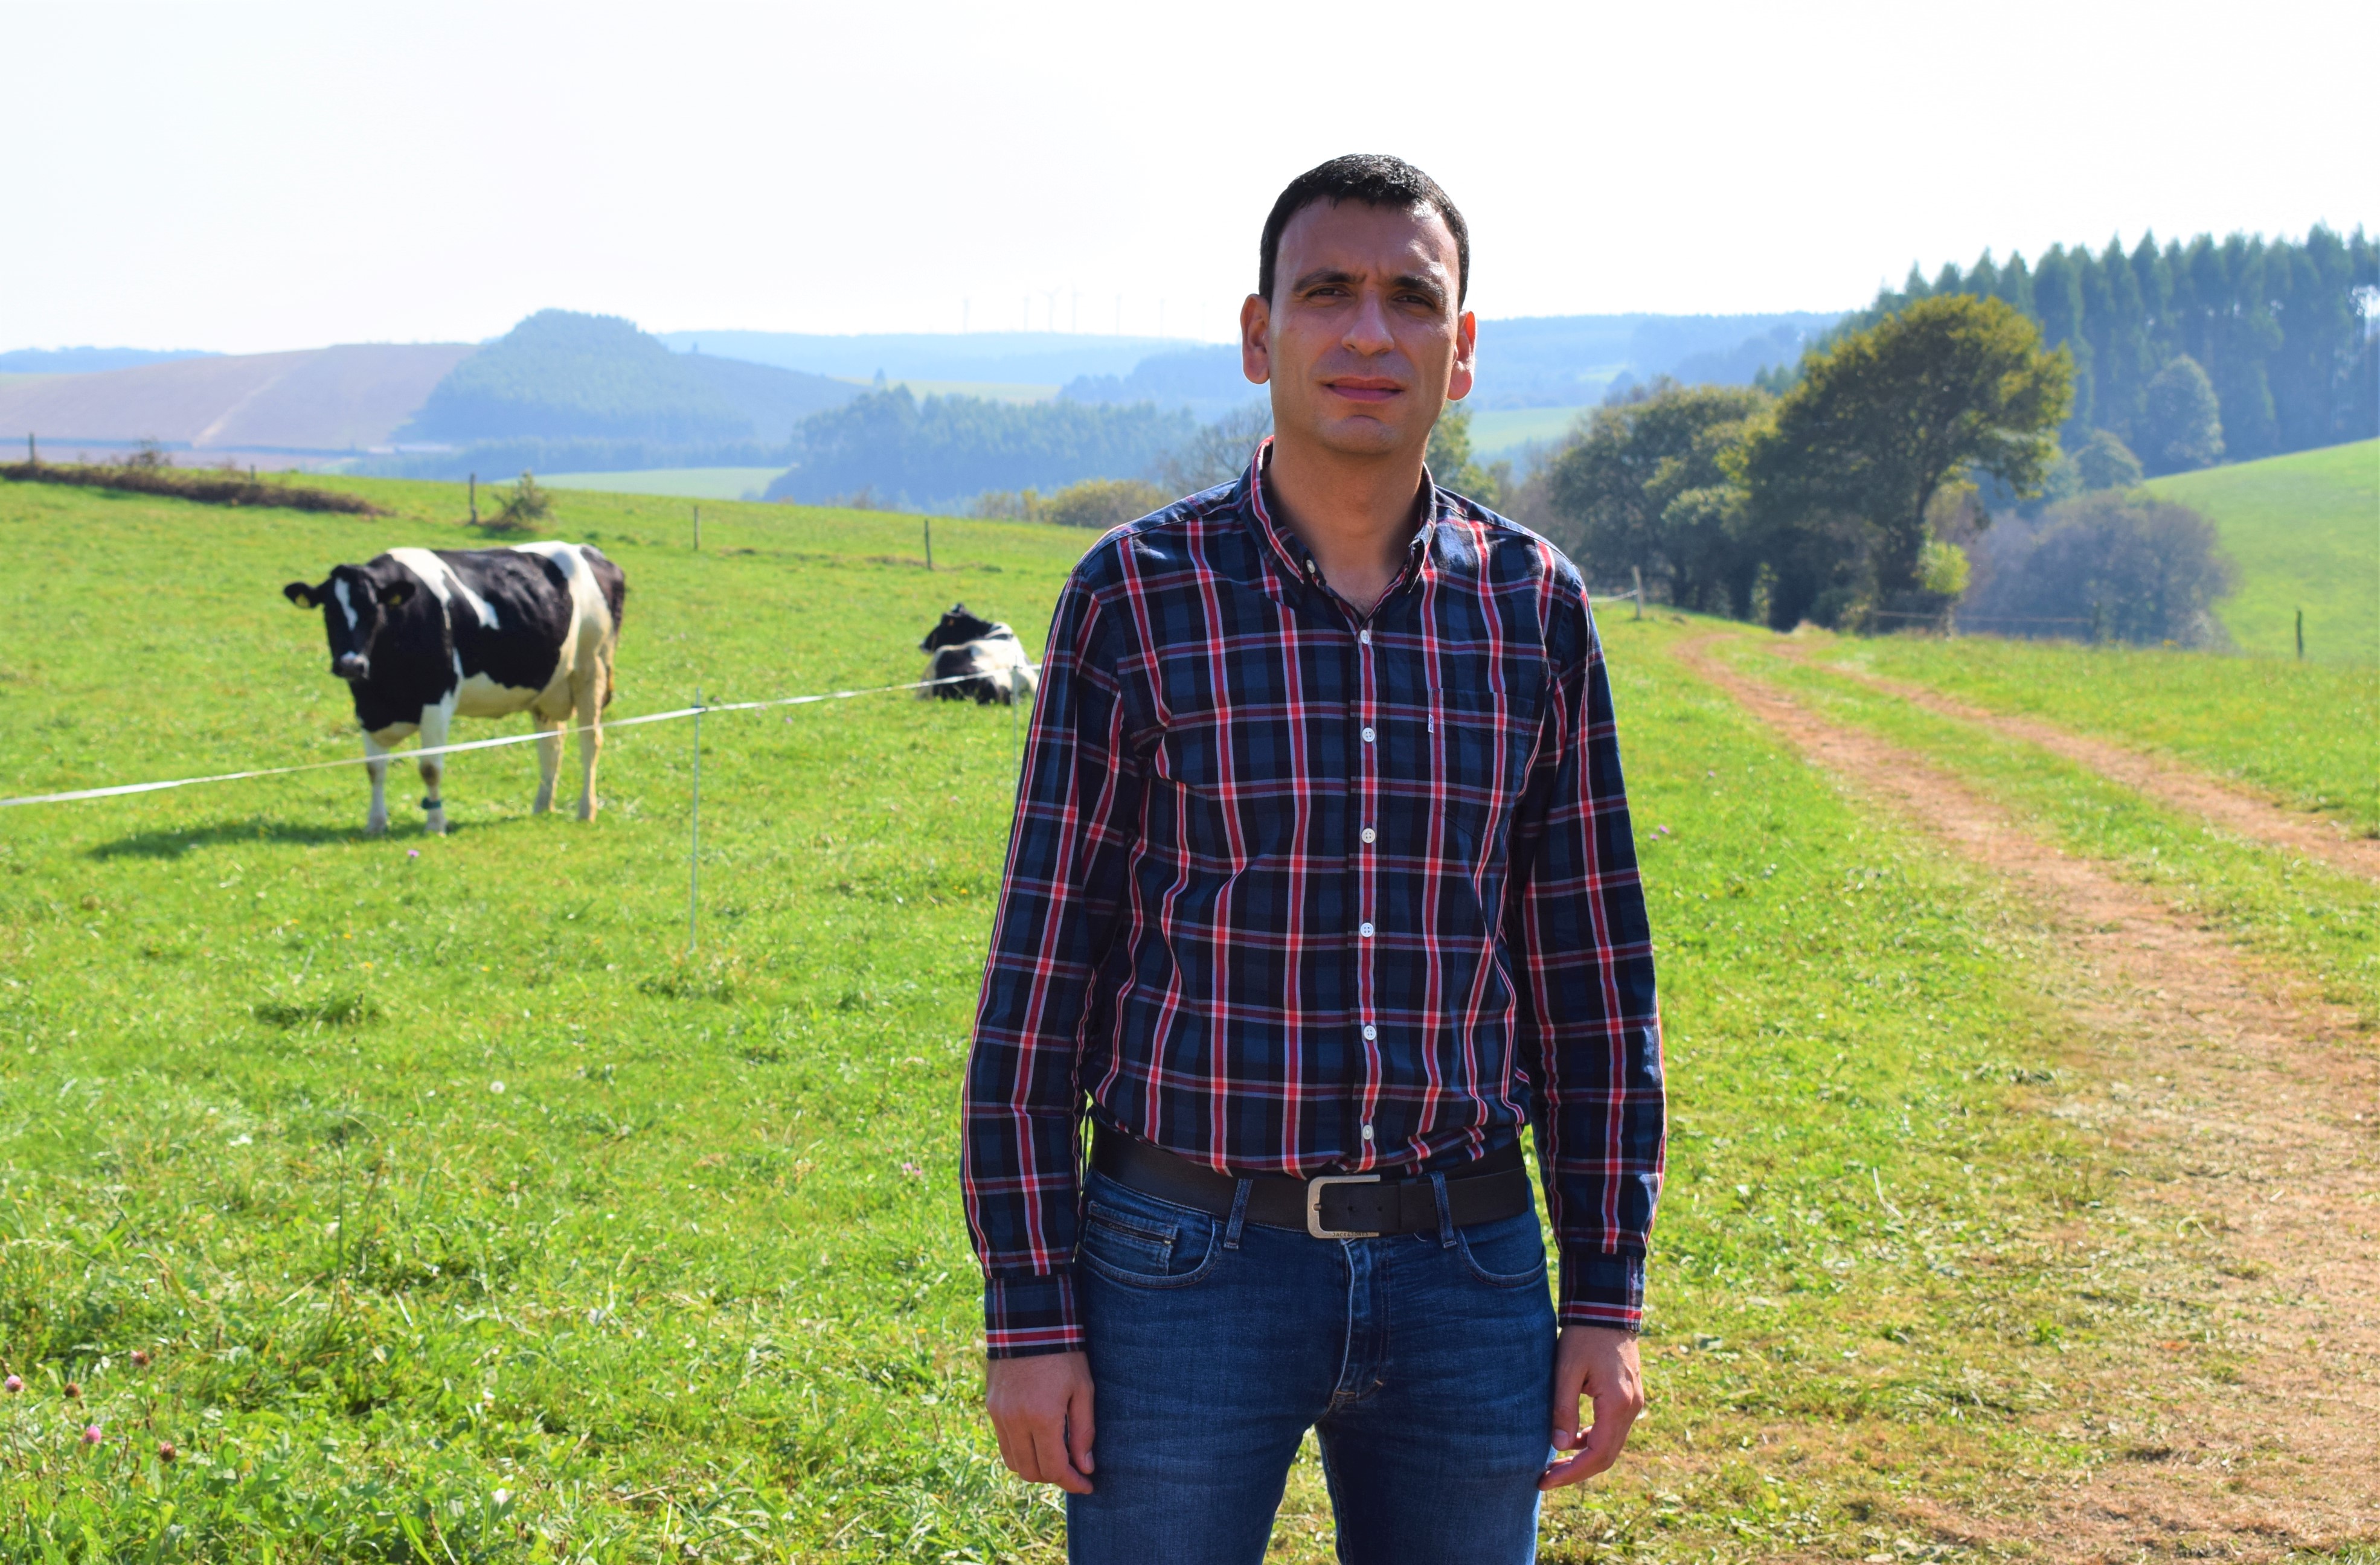 Iván Mato is a cattle veterinarian specialized in bovine mastitis prevention techniques for improving milk quality on dairy farms